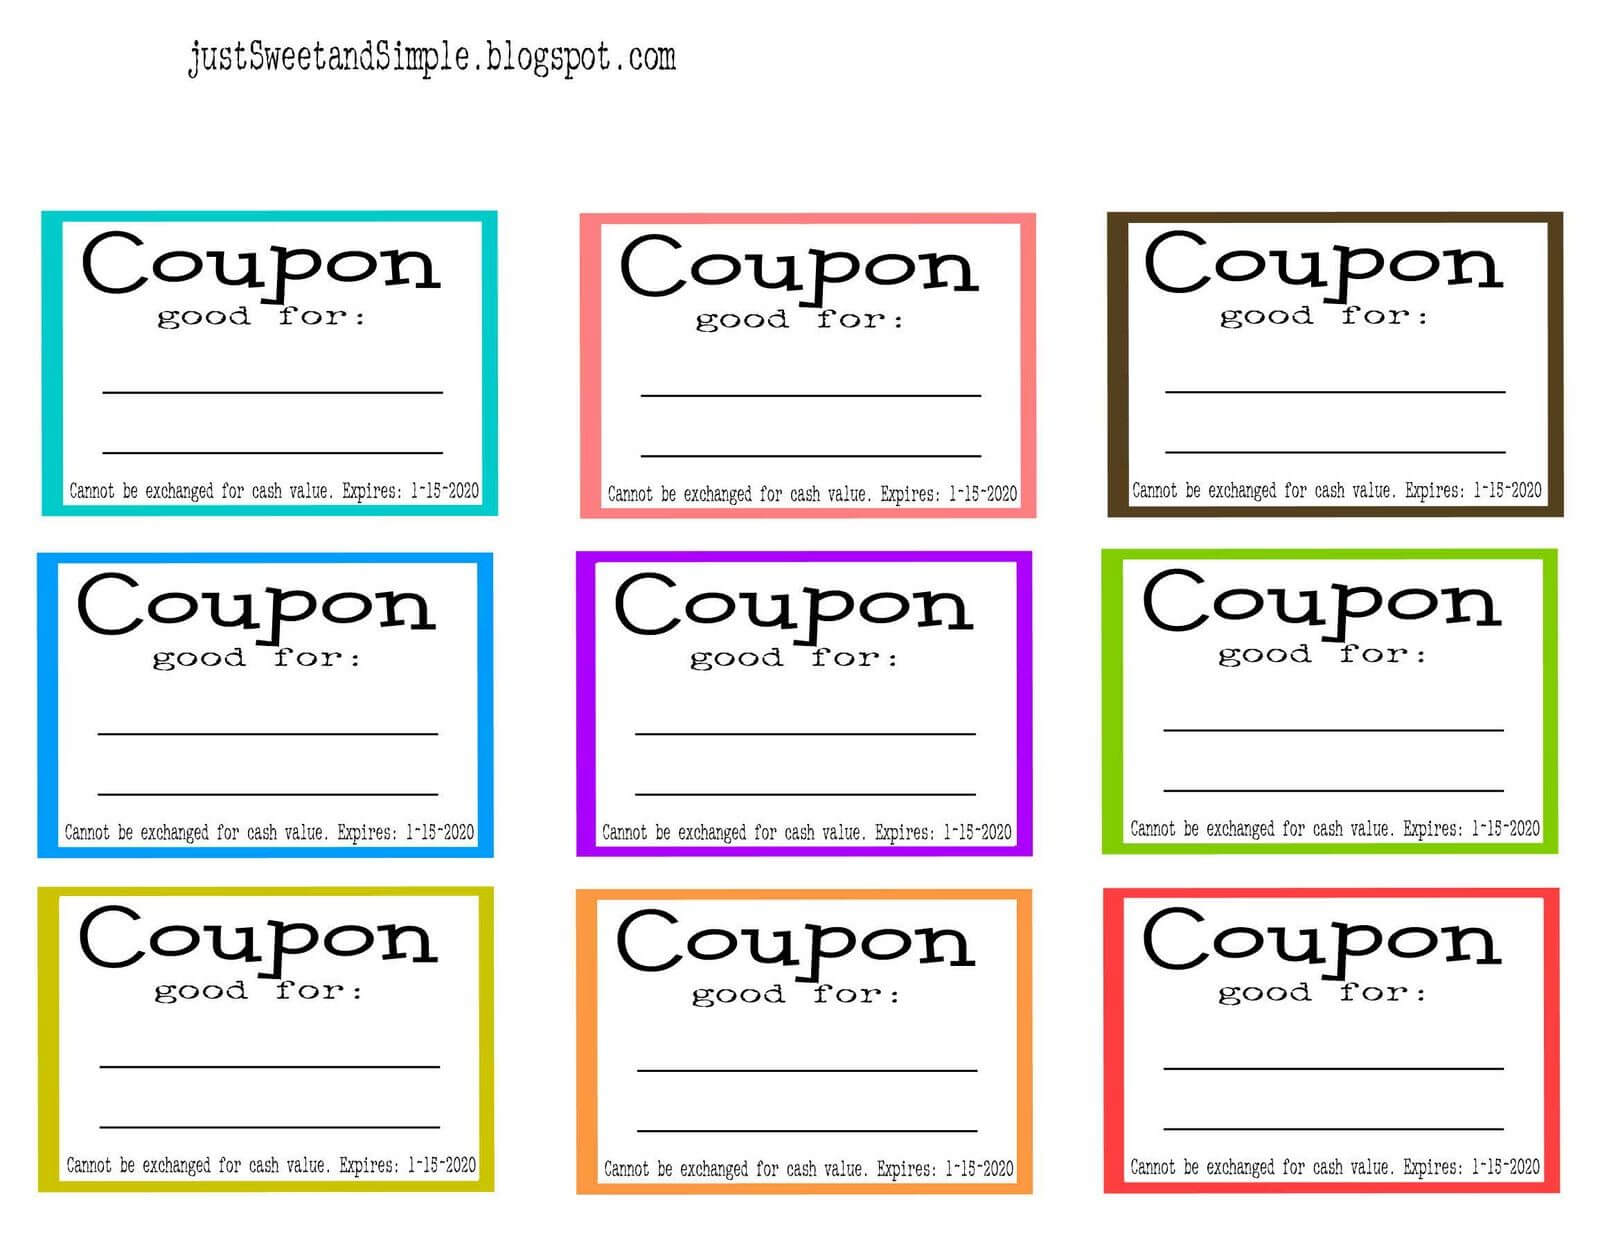 Chores+And+Cleaning+Ideas+For+Kids | Just Sweet And Simple In Coupon Book Template Word